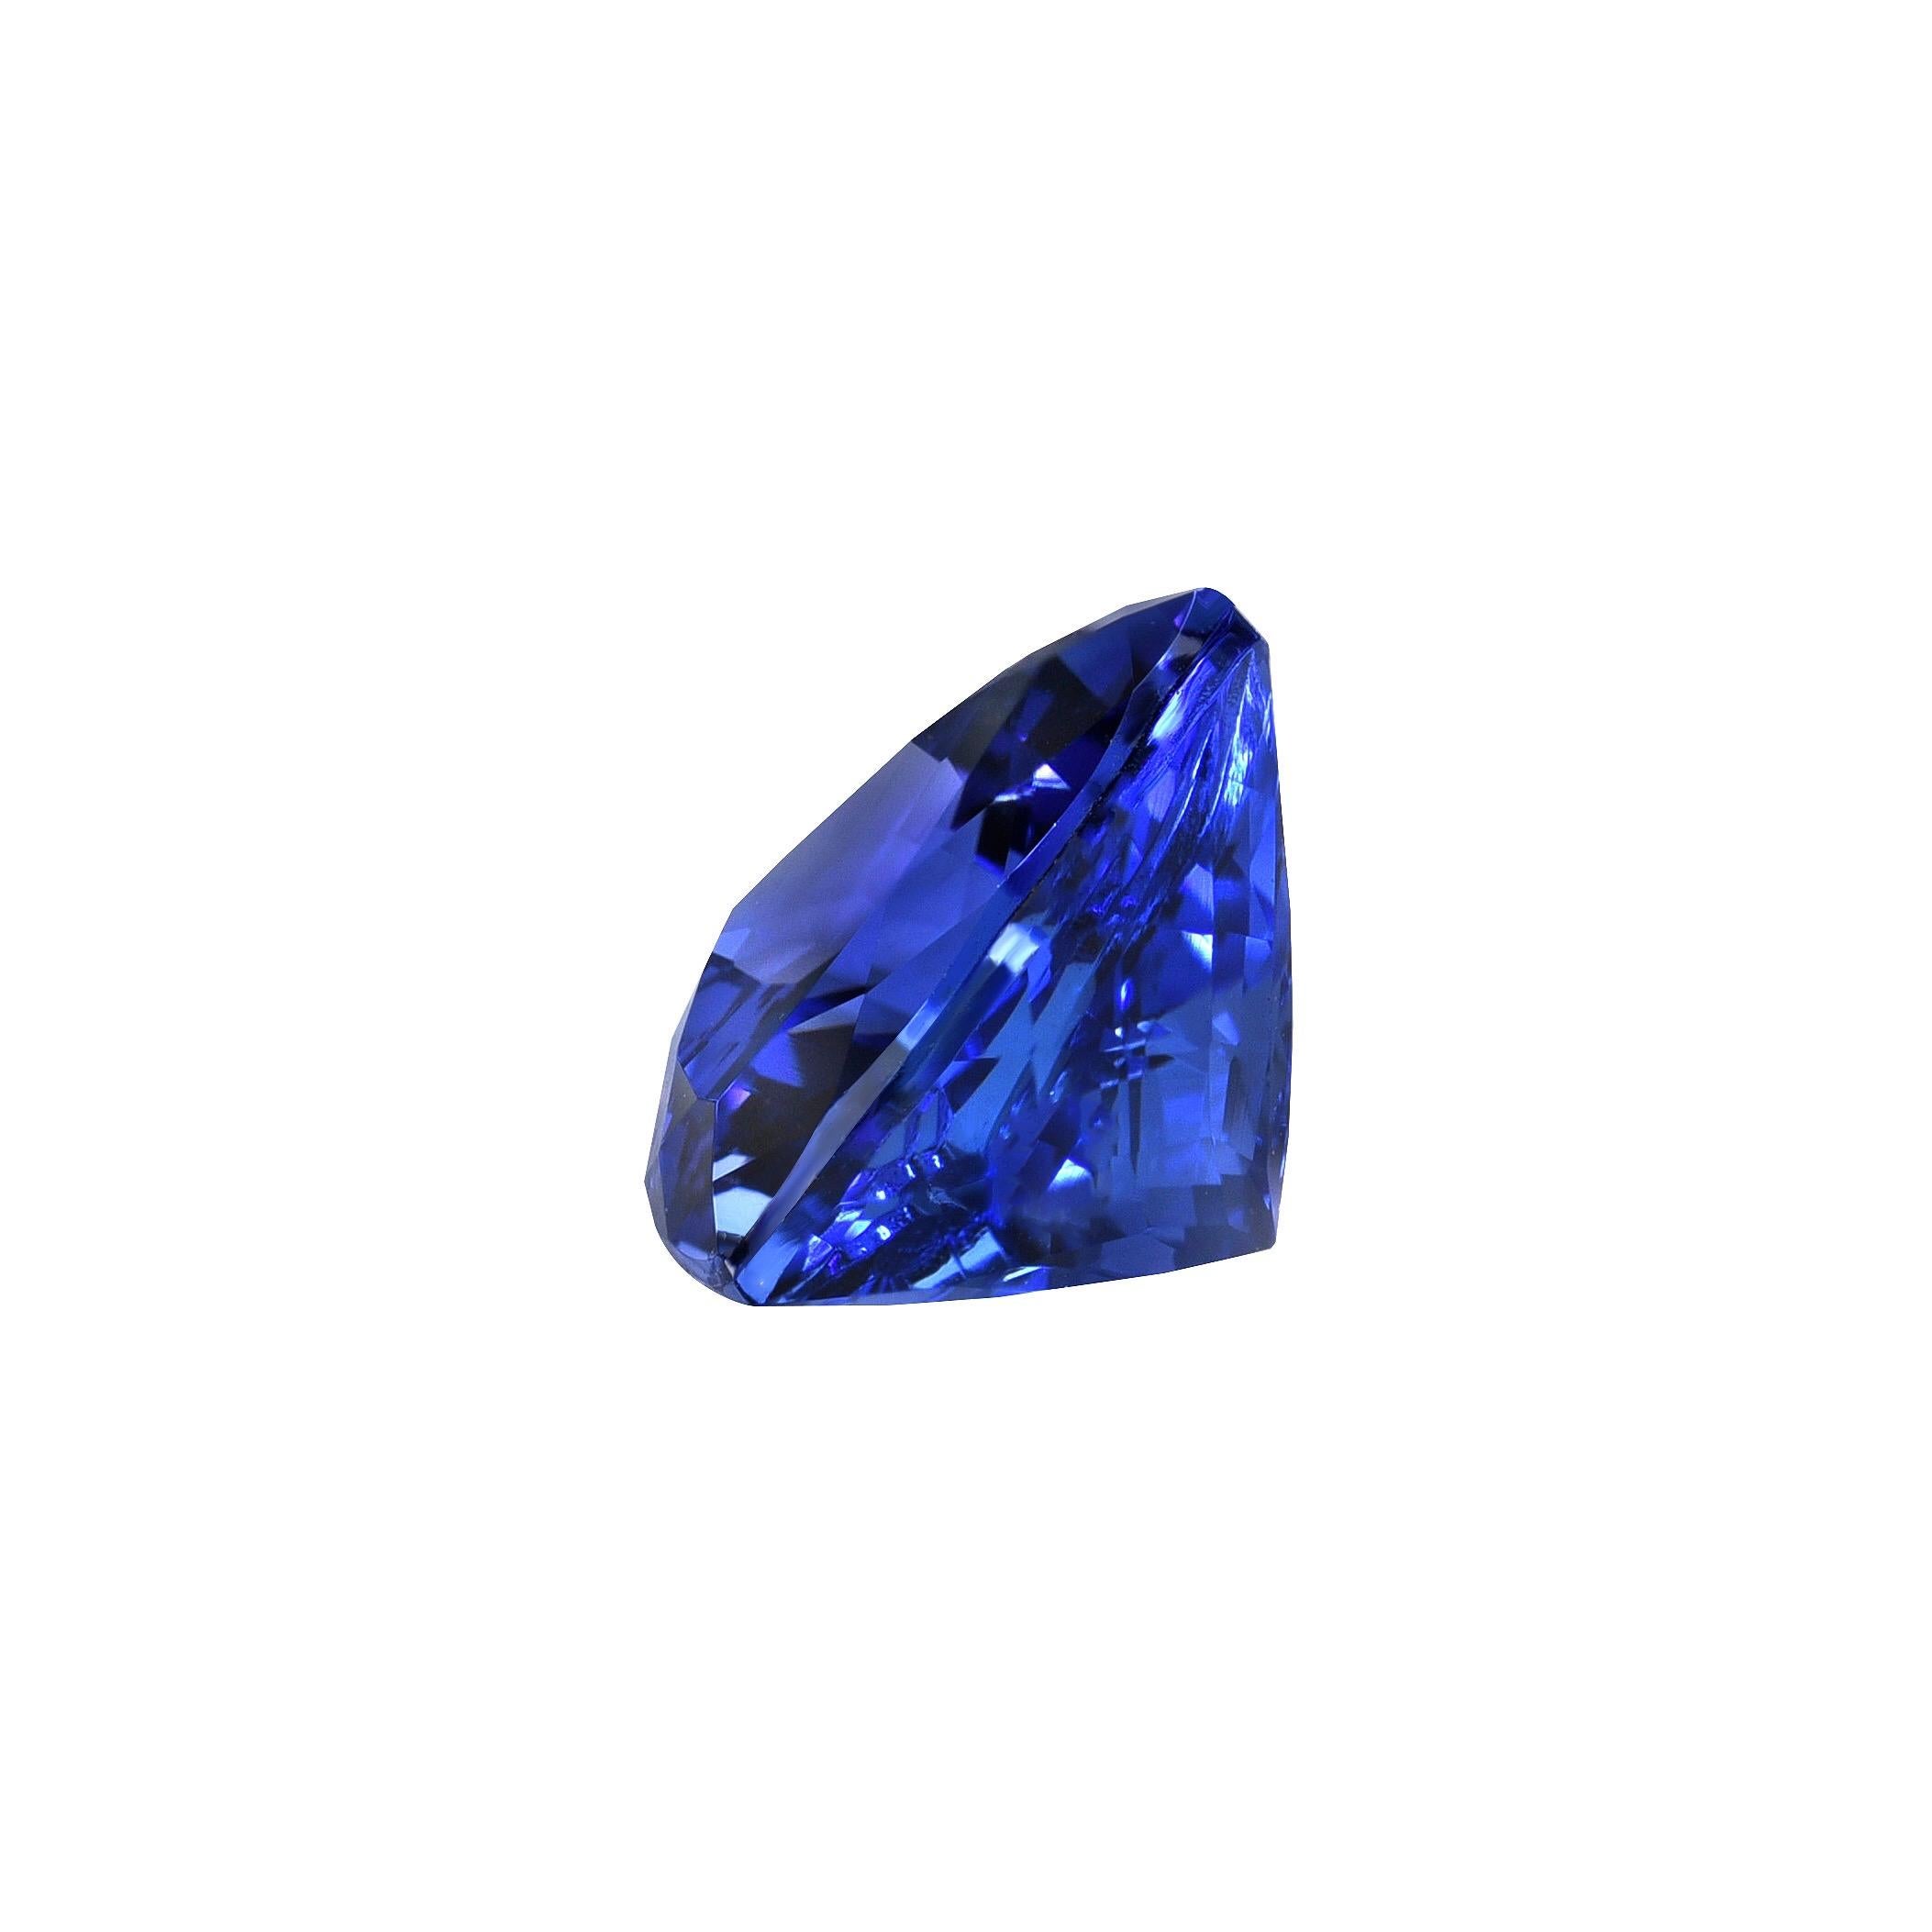 2.42 carat Tanzanite Trillion gemstone, offered loose to someone unique.
Returns are accepted and paid by us within 7 days of delivery.
We offer supreme custom jewelry work upon request. Please contact us for more details.
For your convenience we